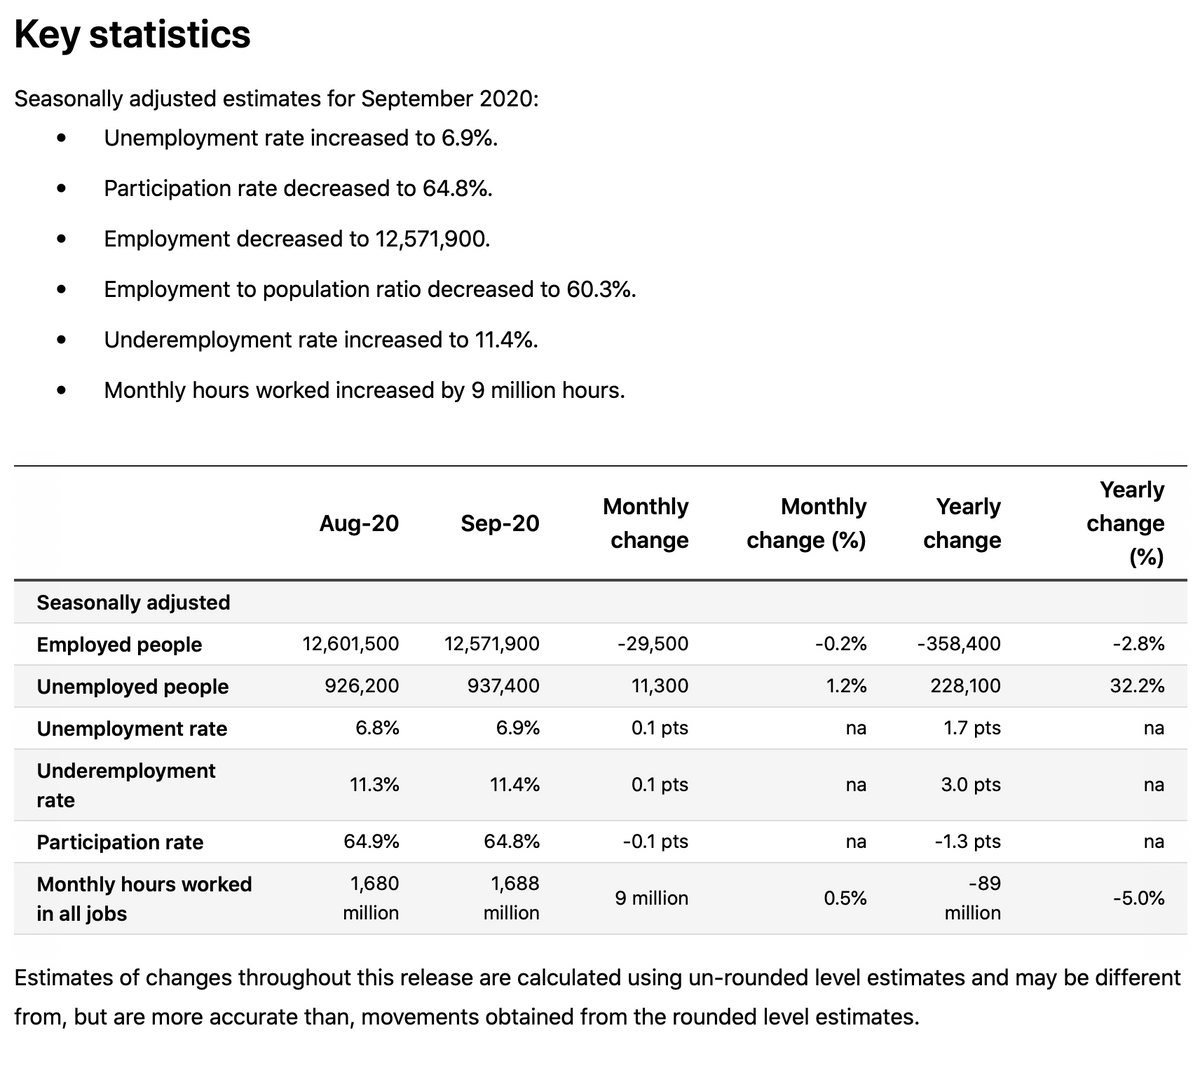 Key statistics
Seasonally adjusted estimates for September 2020:
Unemployment rate increased to 6.9%.
Participation rate decreased to 64.8%.
Employment decreased to 12,571,900.
Employment to population ratio decreased to 60.3%.
Underemployment rate increased to 11.4%.
Monthly hours worked increased by 9 million hours.
Yearly
Monthly
Monthly
Yearly
Aug-20
Sep-20
change
change
change (%)
change
(%)
Seasonally adjusted
Employed people
12,601,500
12,571,900
-29,500
-0.2%
-358,400
-2.8%
Unemployed people
926,200
937,400
11,300
1.2%
228,100
32.2%
Unemployment rate
6.8%
6.9%
0.1 pts
1.7 pts
na
na
Underemployment
11.3%
11.4%
0.1 pts
3.0 pts
na
na
rate
Participation rate
64.9%
64.8%
-0.1 pts
-1.3 pts
na
na
Monthly hours worked
in all jobs
1,680
1,688
-89
9 million
0.5%
-5.0%
million
million
million
Estimates of changes throughout this release are calculated using un-rounded level estimates and may be different
from, but are more accurate than, movements obtained from the rounded level estimates.
